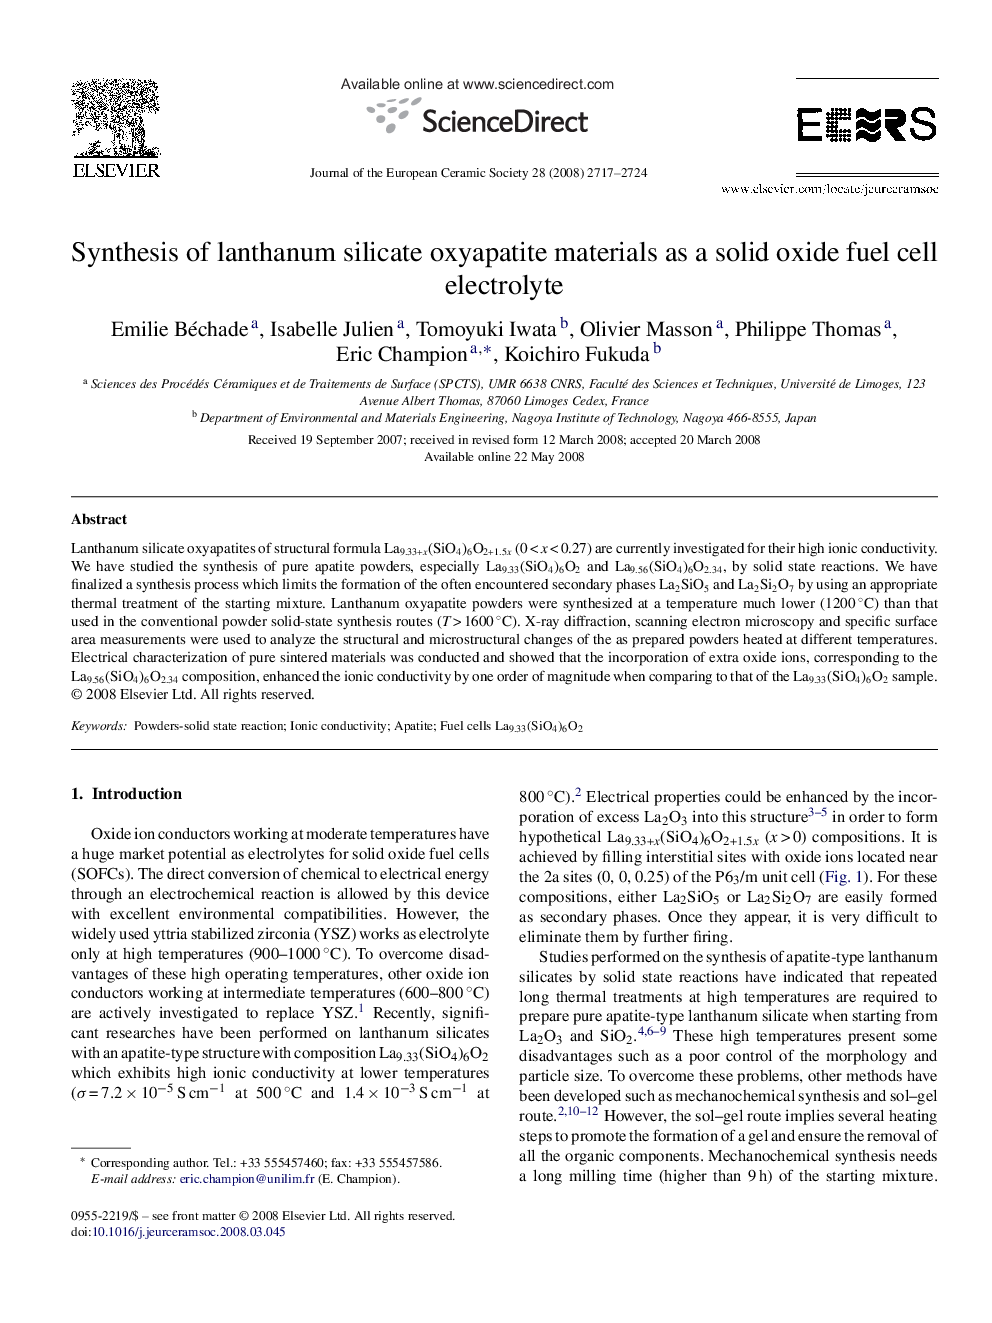 Synthesis of lanthanum silicate oxyapatite materials as a solid oxide fuel cell electrolyte